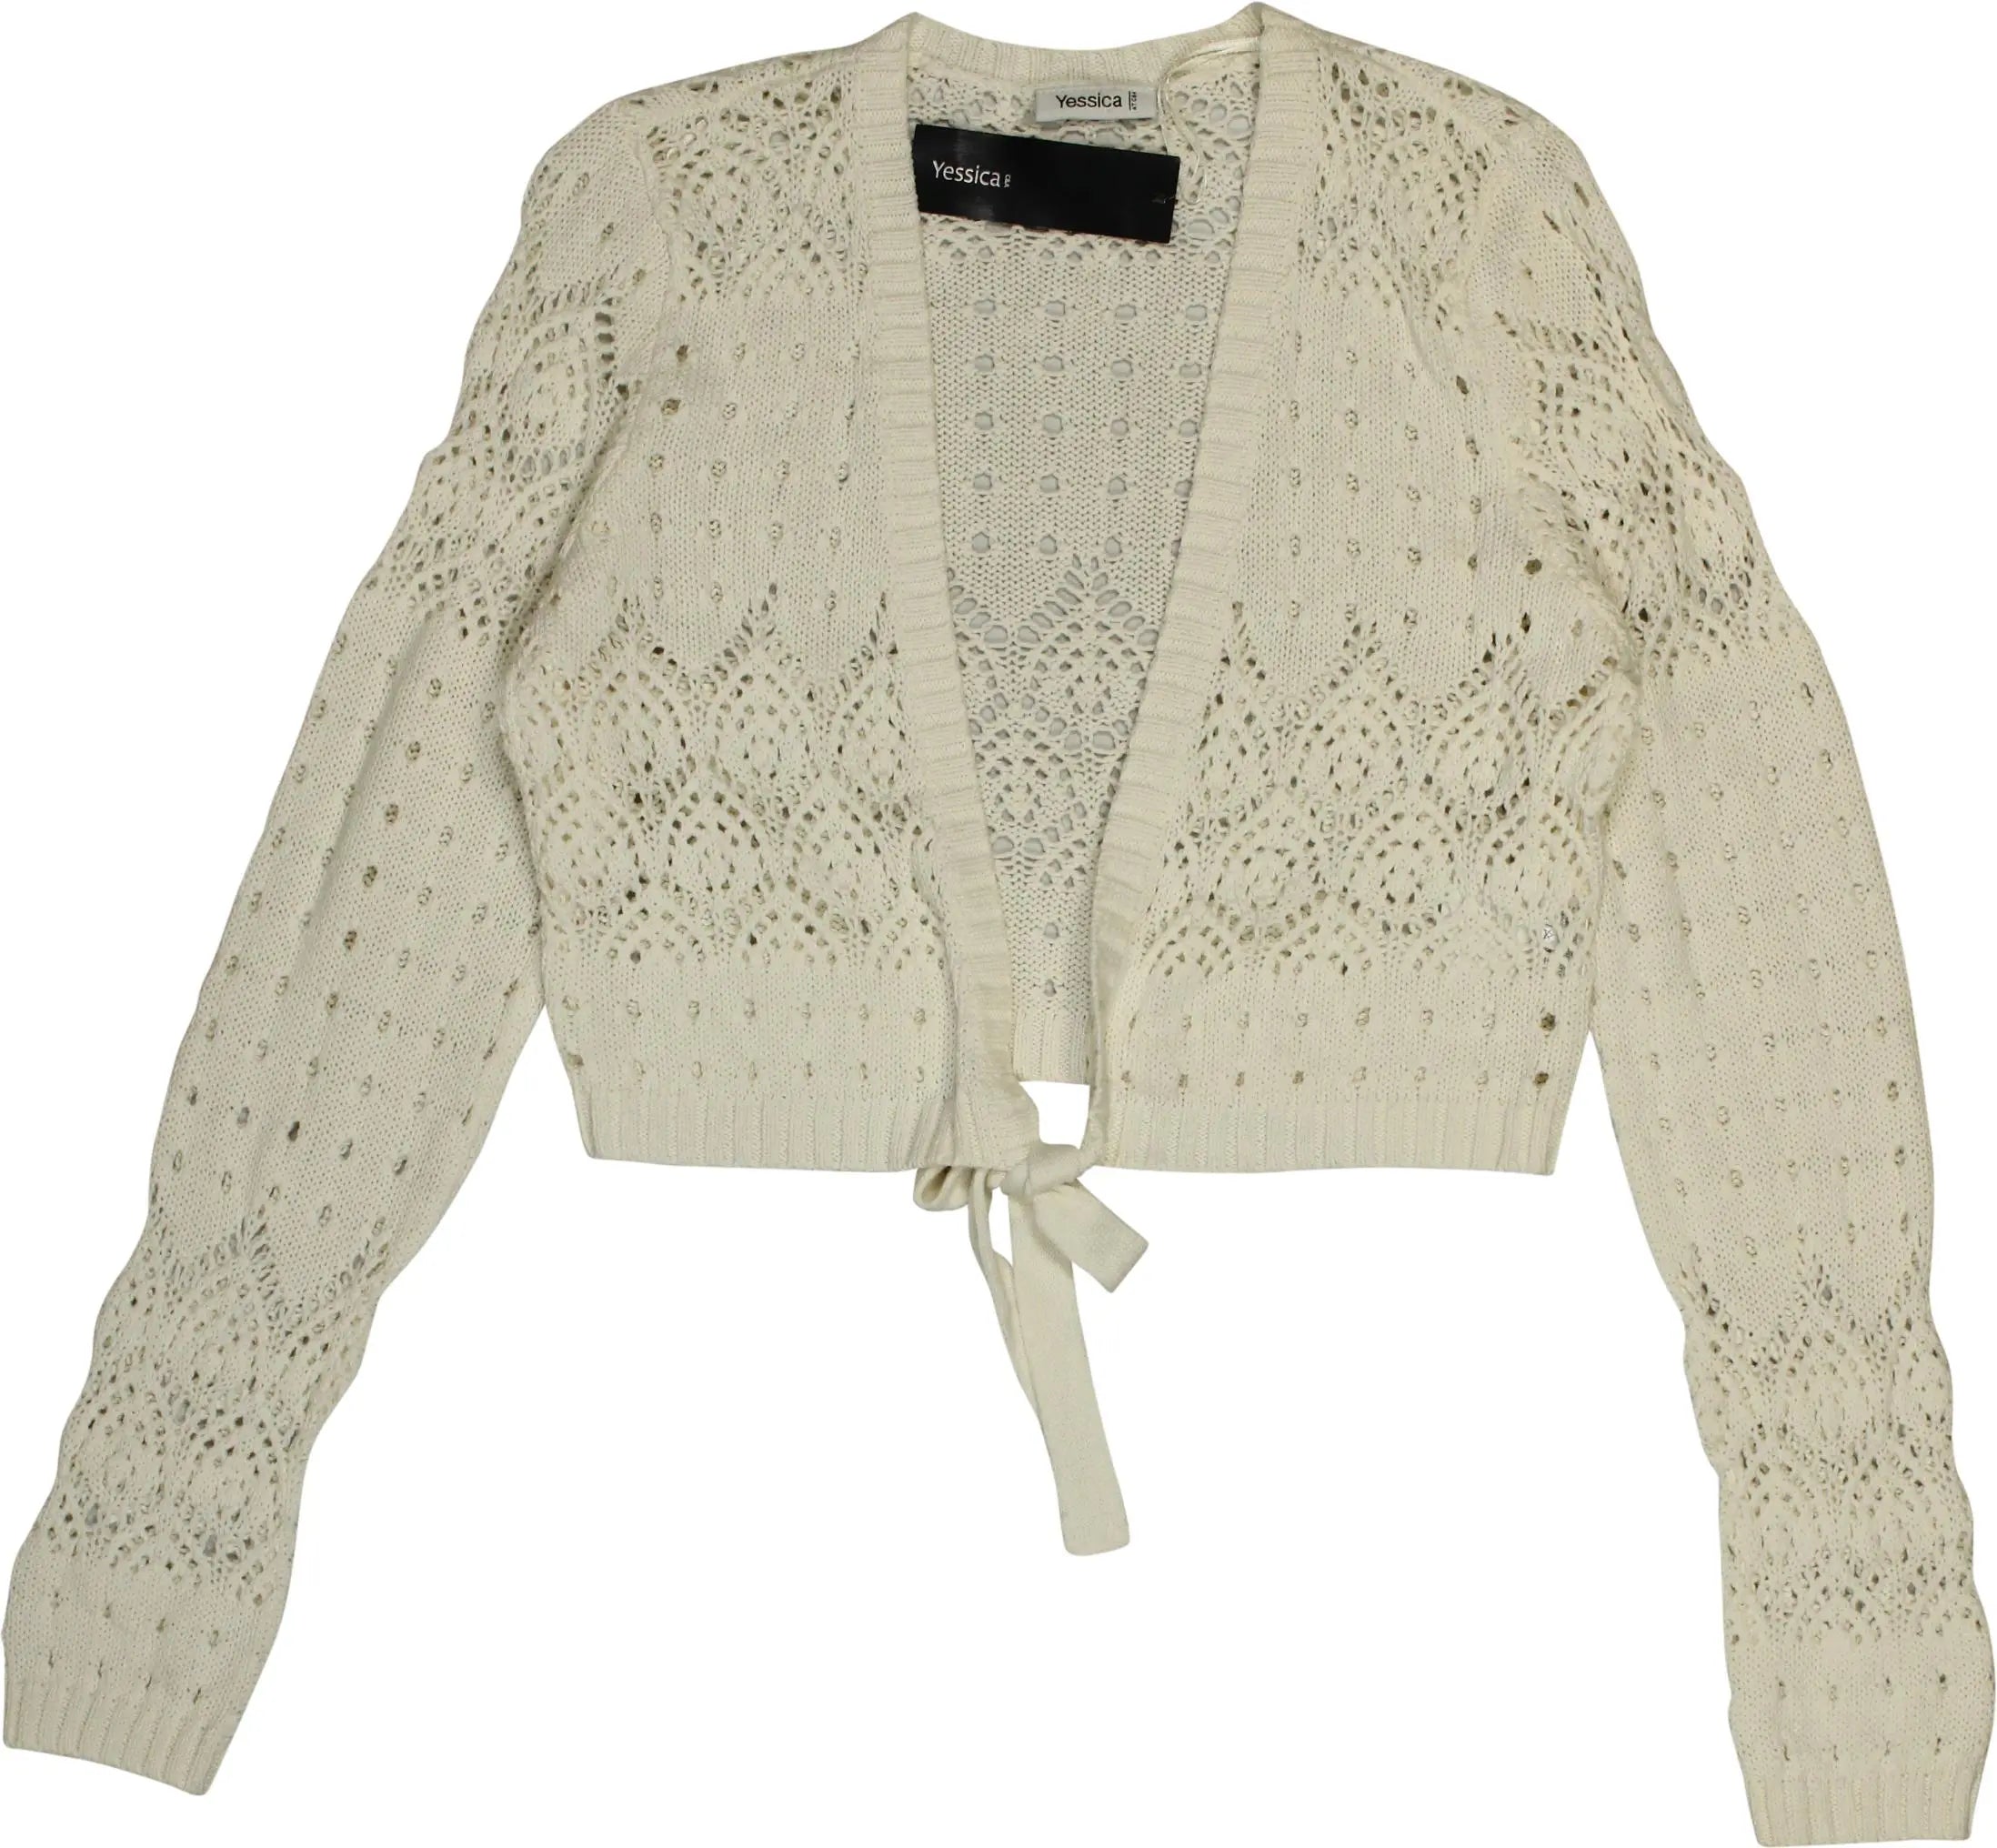 C&A - Crochet Cardigan- ThriftTale.com - Vintage and second handclothing